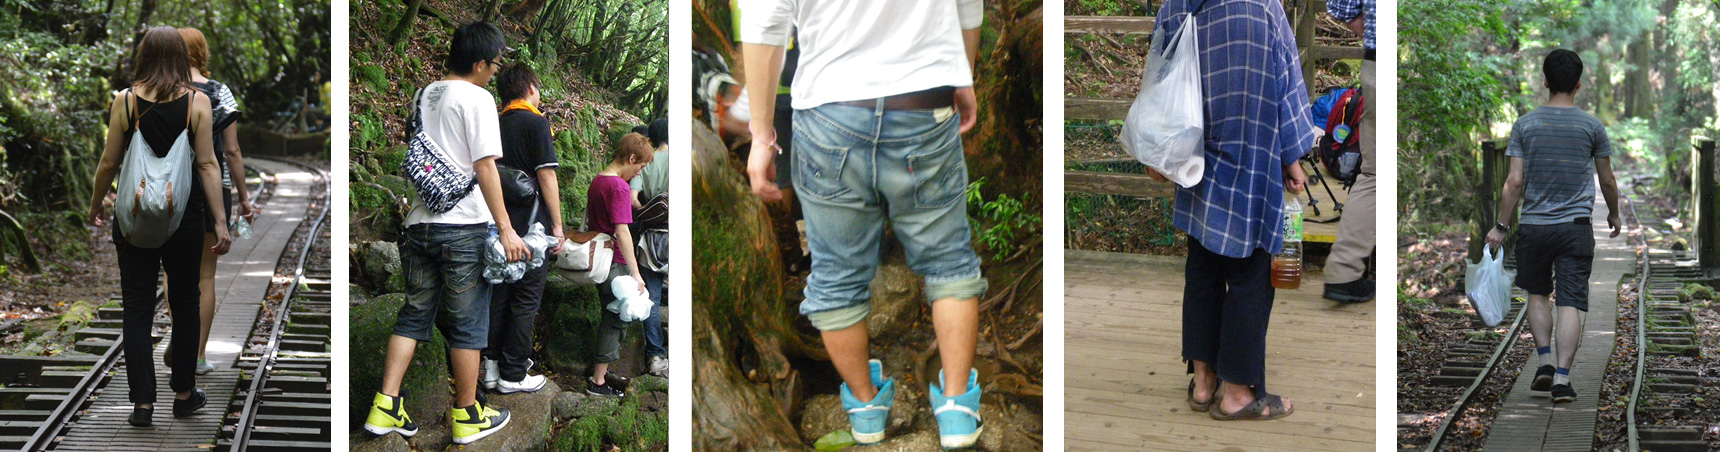 Examples of light clothing unsuitable for hiking in five photos. The photo on the far left shows the back view of a woman in a tank top and another in a T-shirt and shorts. The photo second from left shows several people wearing T-shirts and sneakers, while holding various items. The photo third from left shows a person in cotton jeans and sneakers, which do not easily dissipate sweat. The photo fourth from left shows a person wearing sandals with exposed feet and a plastic bag slung over his shoulder. The fifth photo from the left (on the far right) shows a person in a T-shirt, shorts and sneakers, and holding a bag.